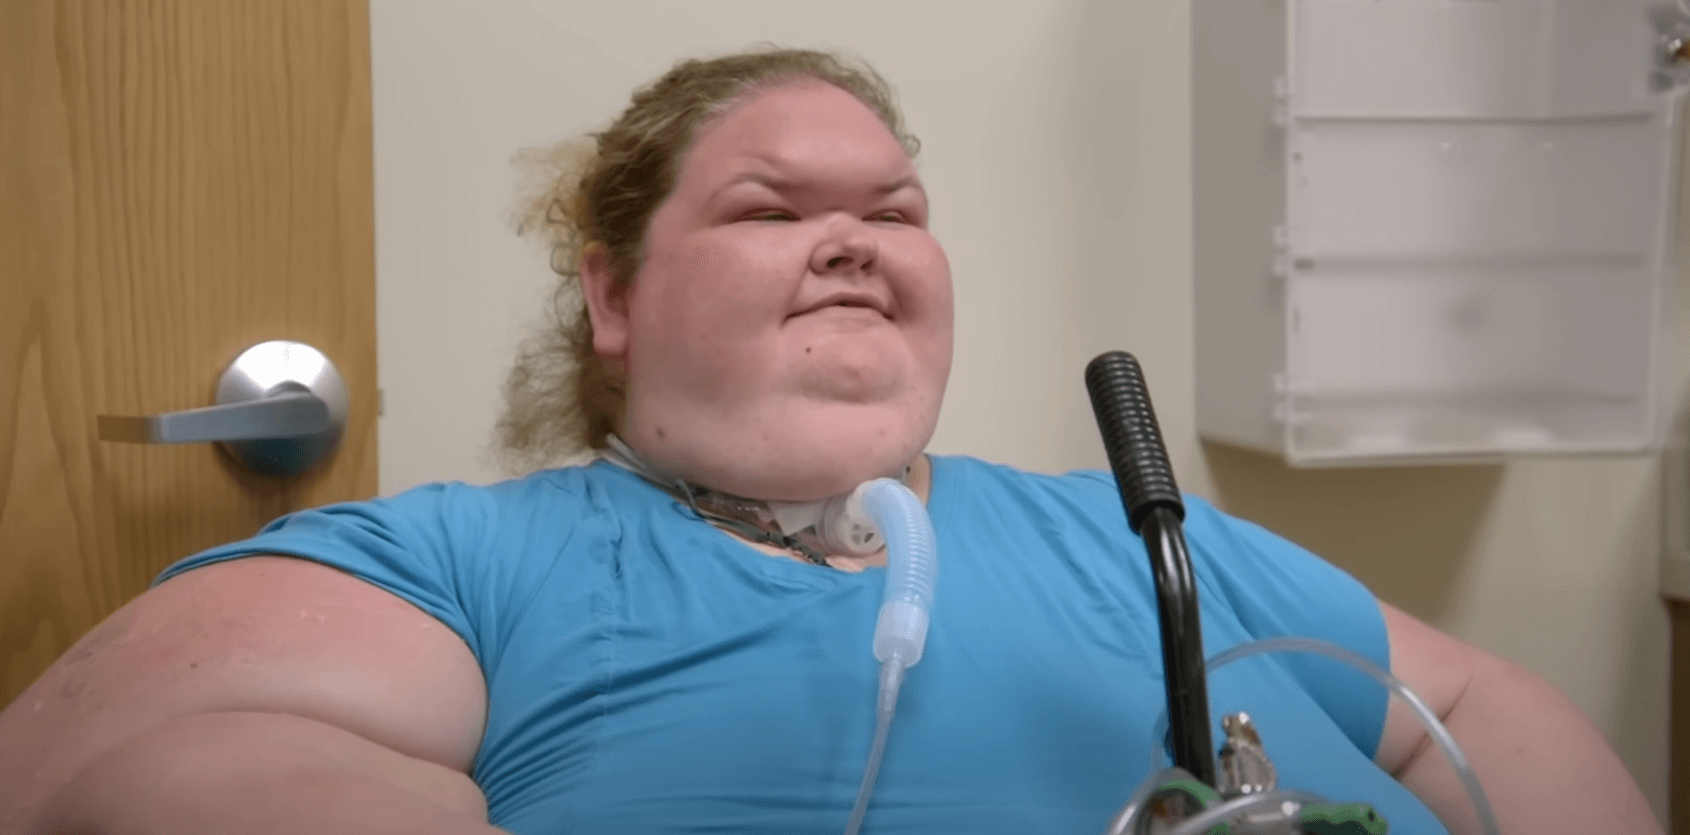 '1000 Lb. Sisters' Season 4 star Tammy Slaton sitting in a wheelchair before her major weight loss